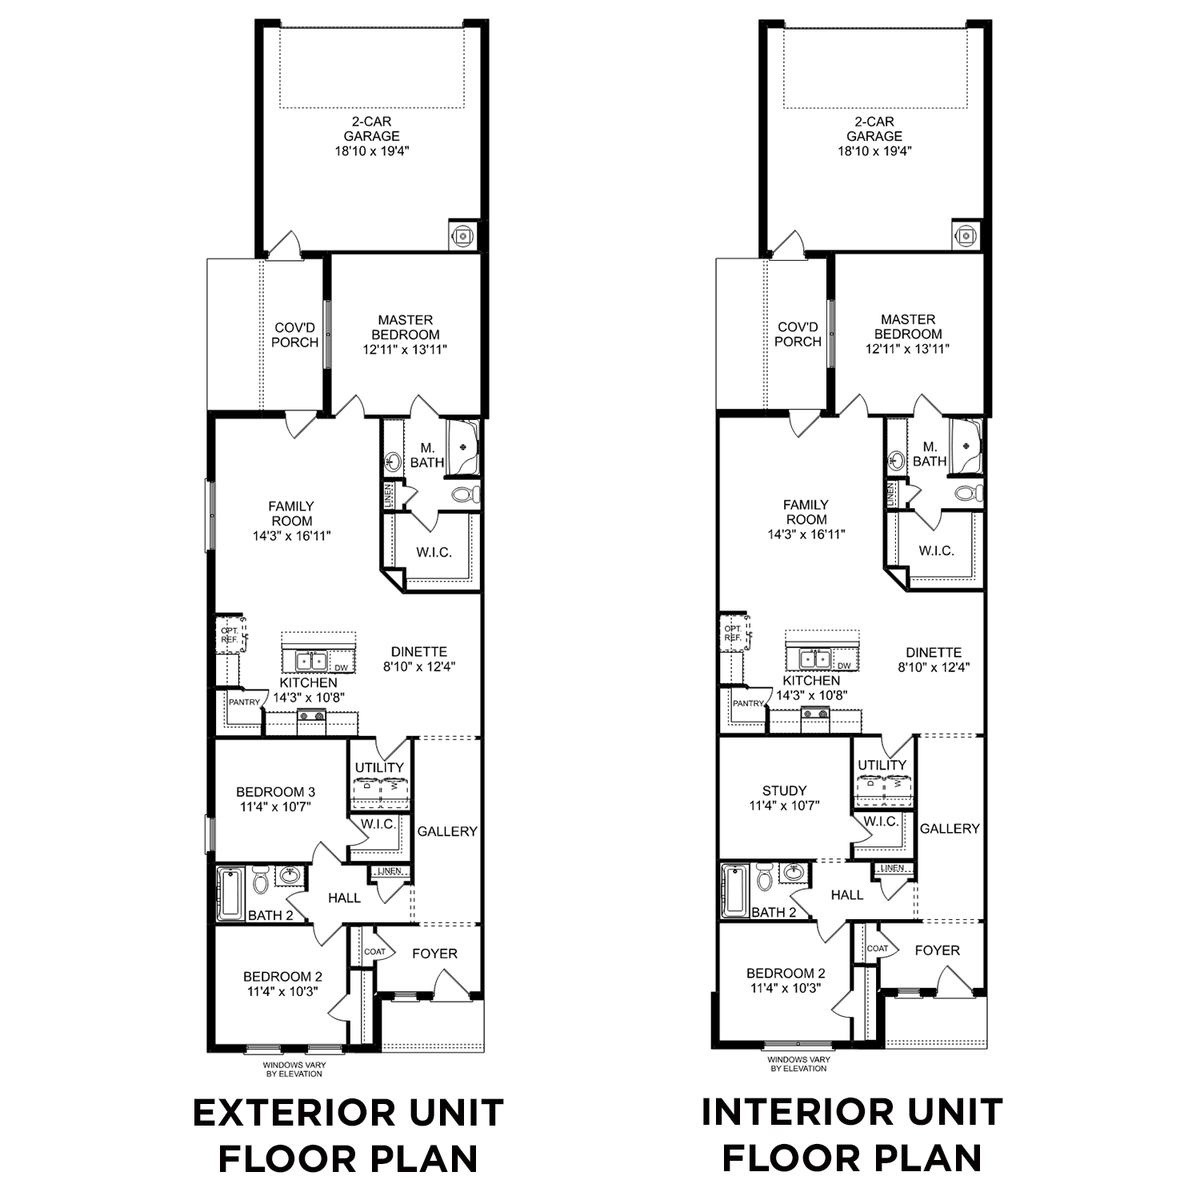 1 - The Camilla C floor plan layout for 425 Ronnie Drive in Davidson Homes' Cain Park community.